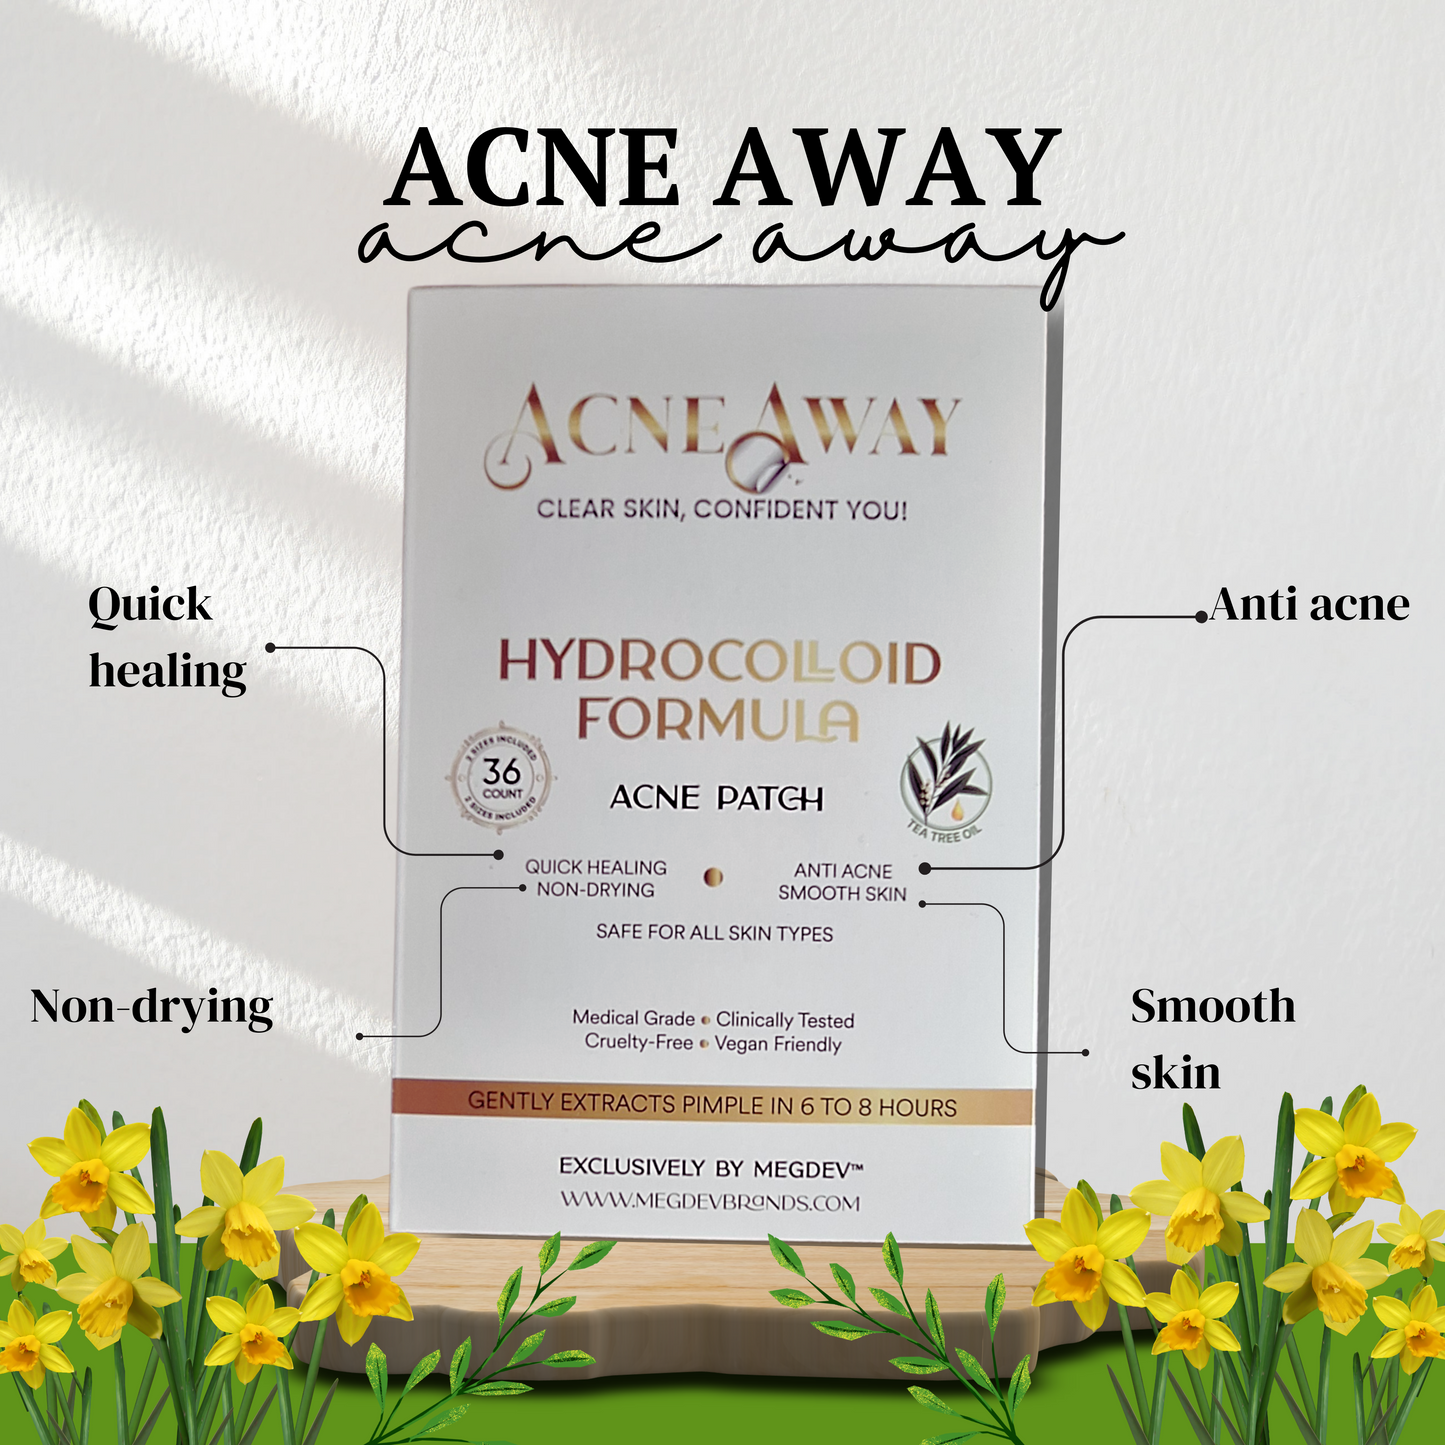 Acne Away acne patch features: Quick healing, Anti-acne, Smooth skin and Non-drying.